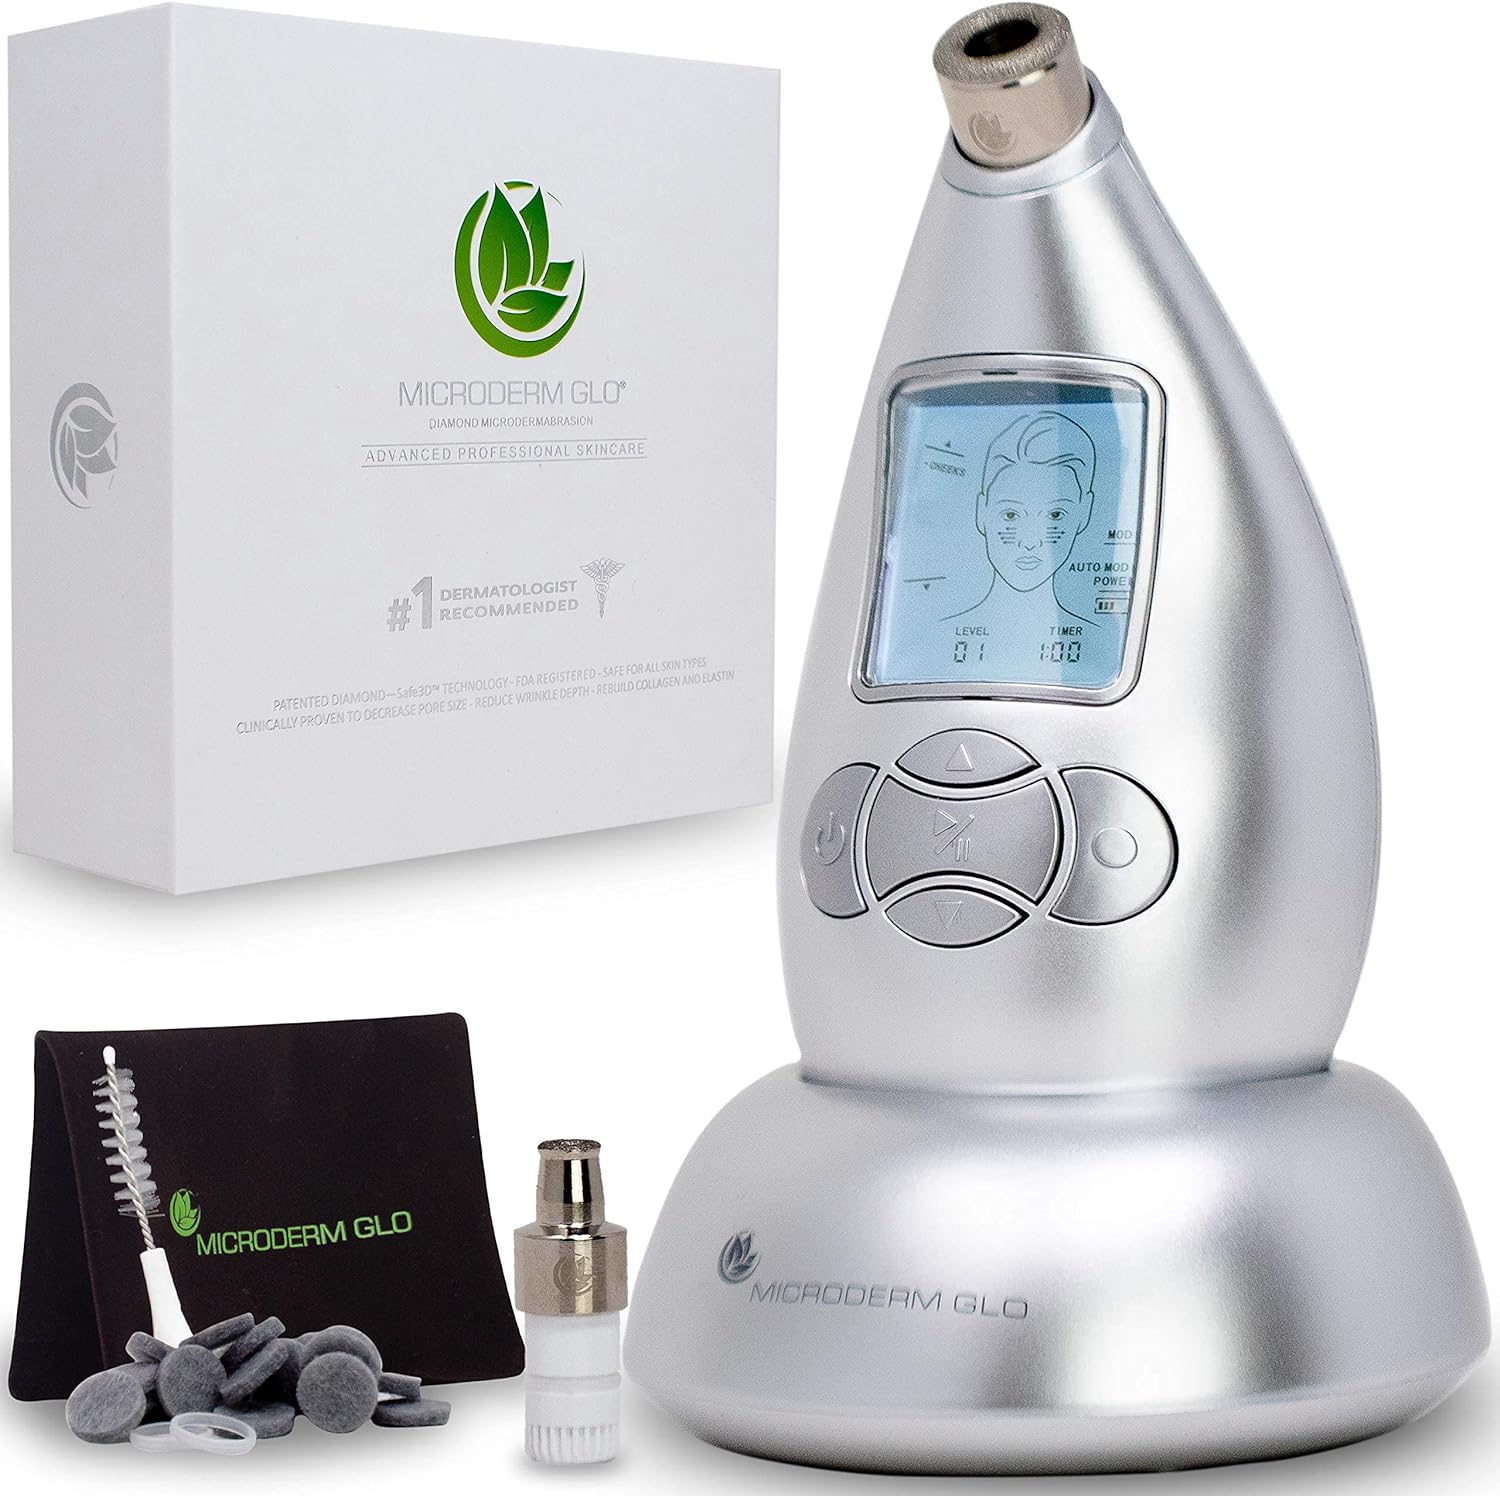 Best microdermabrasion machine for home use